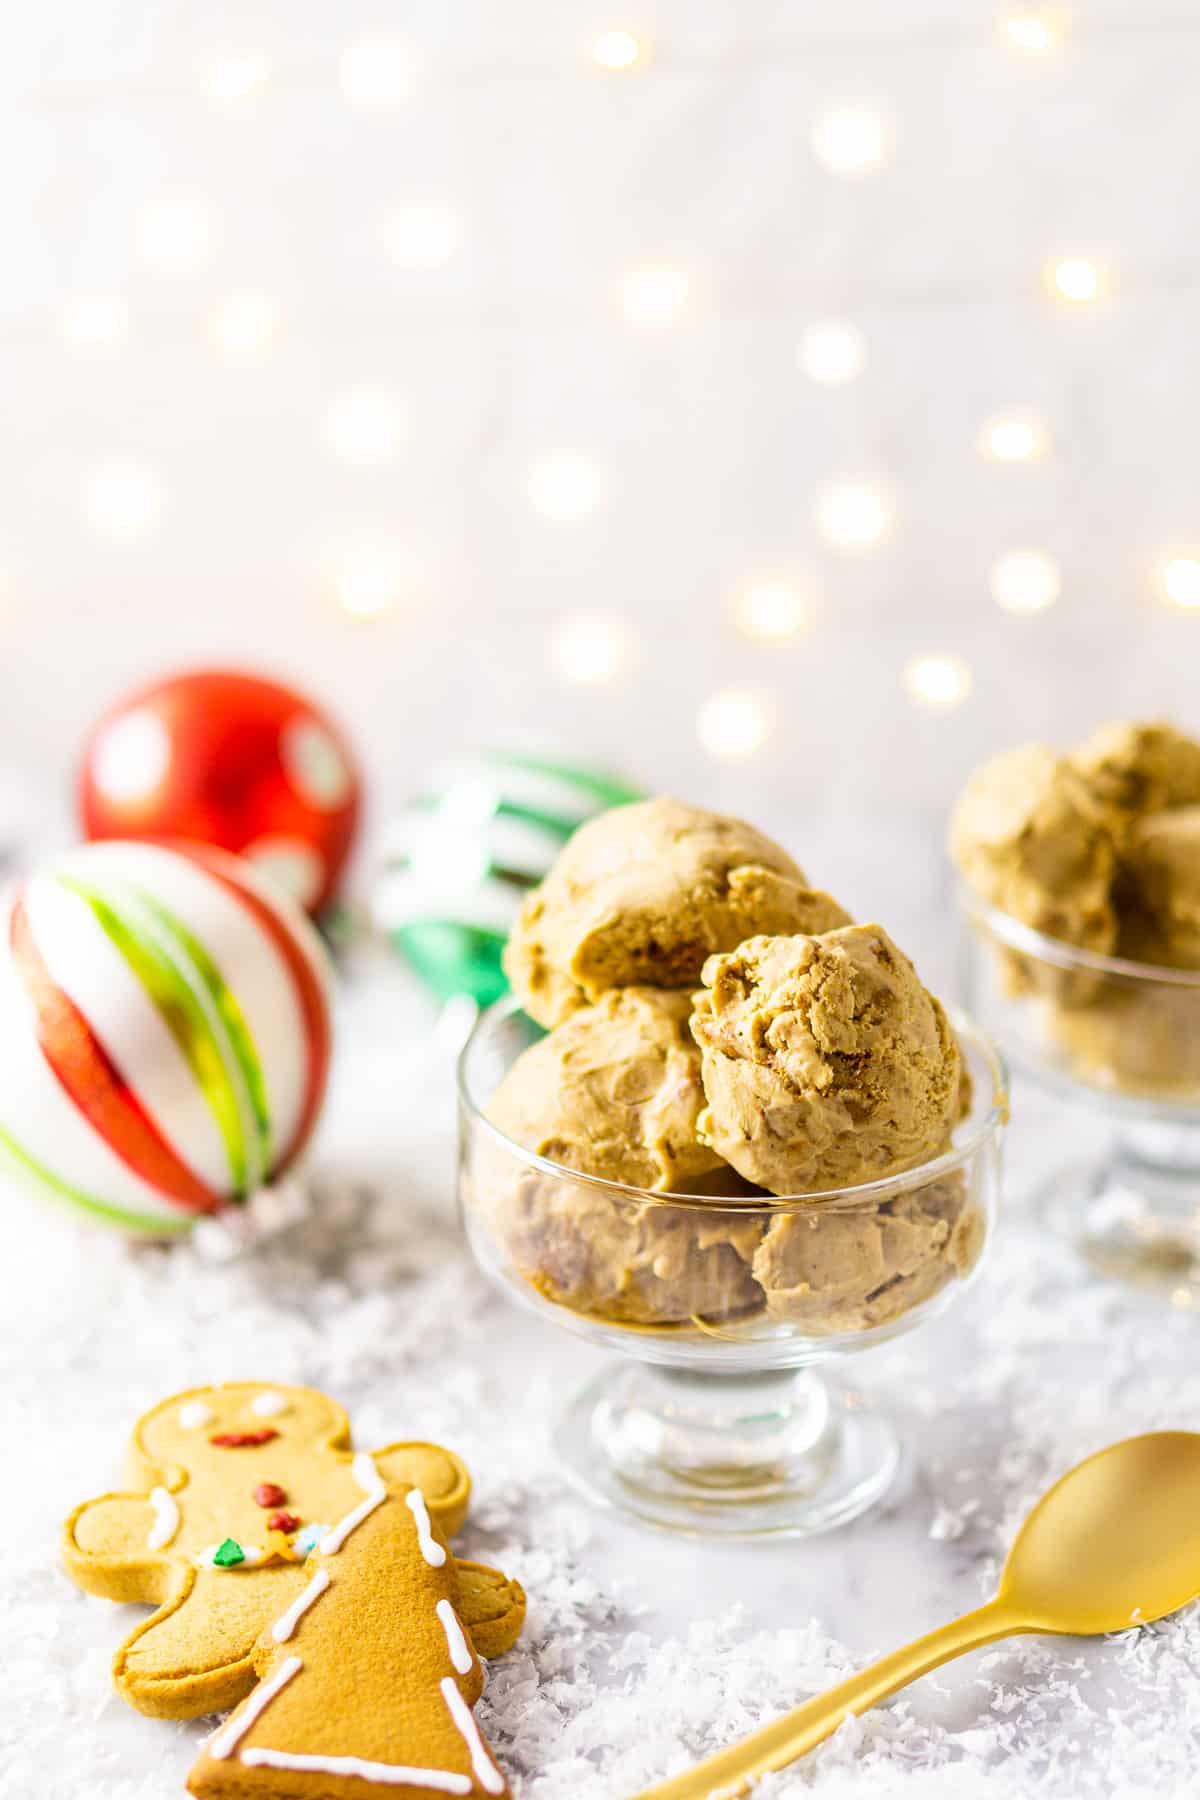 The gingerbread ice cream with a spoon to the side and gingerbread cookies on the other side with lights in the background.